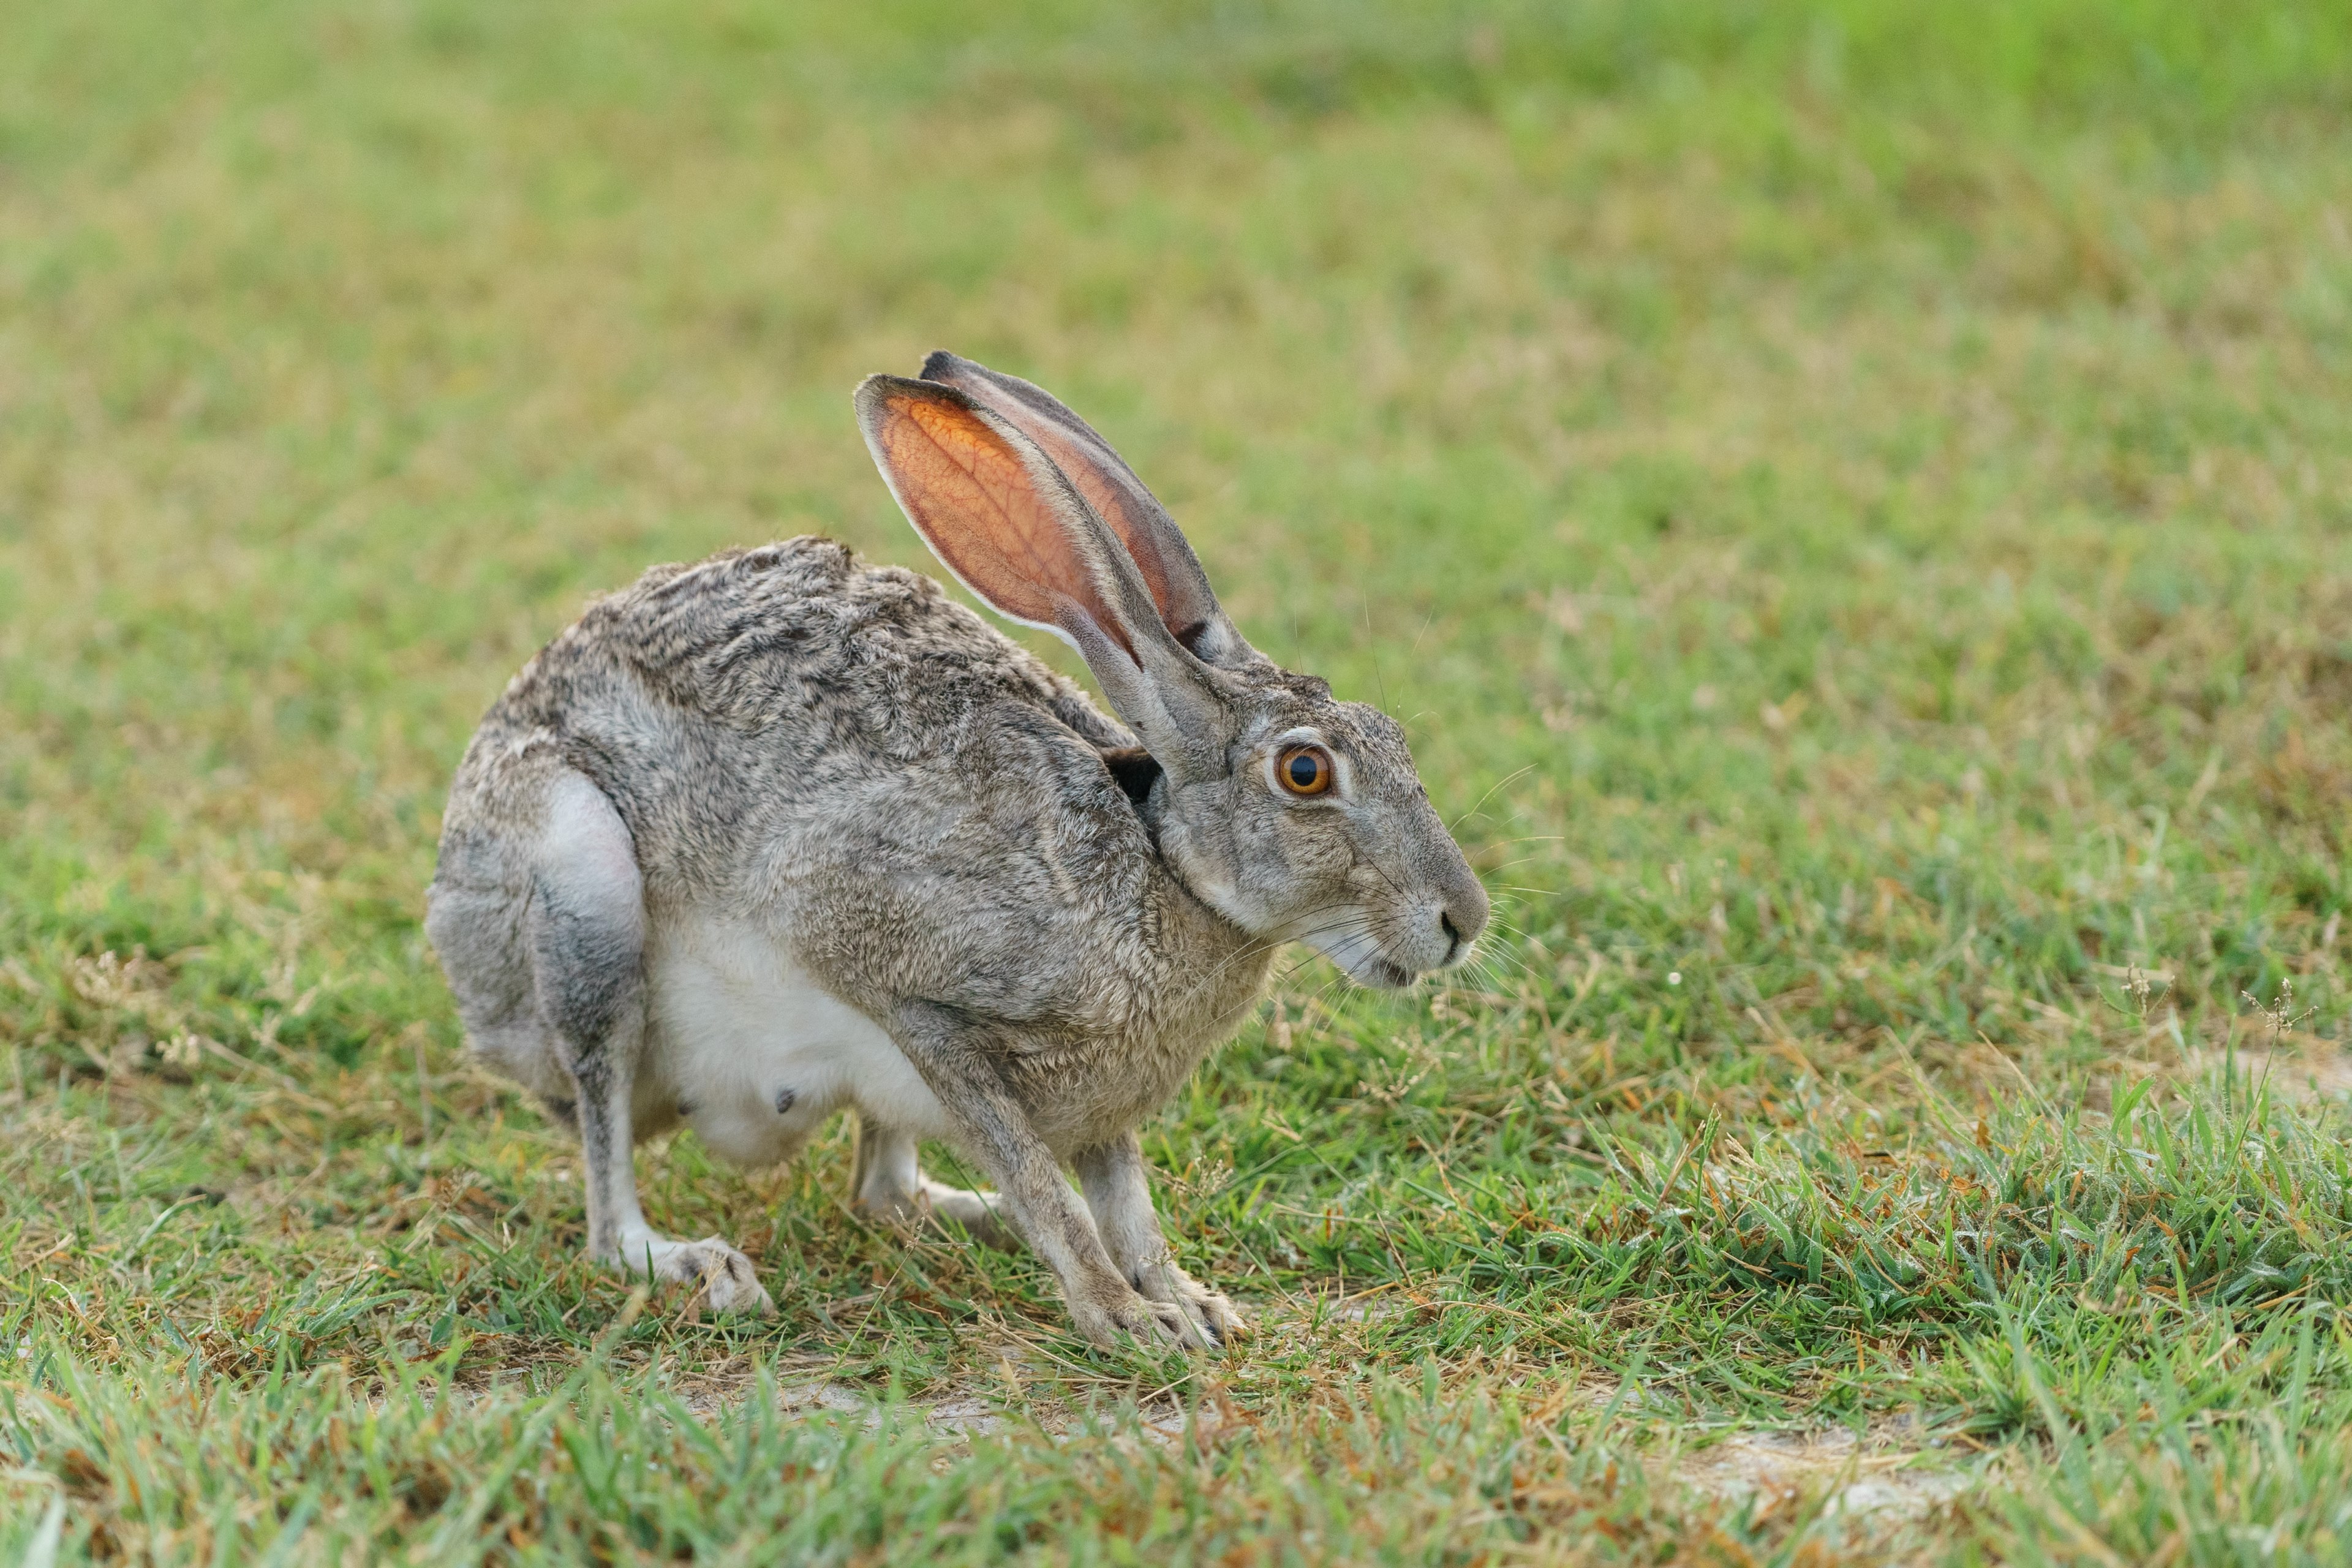 wild hare hops through a grassy fieldhungry rabbit 4k wallpaper and ...